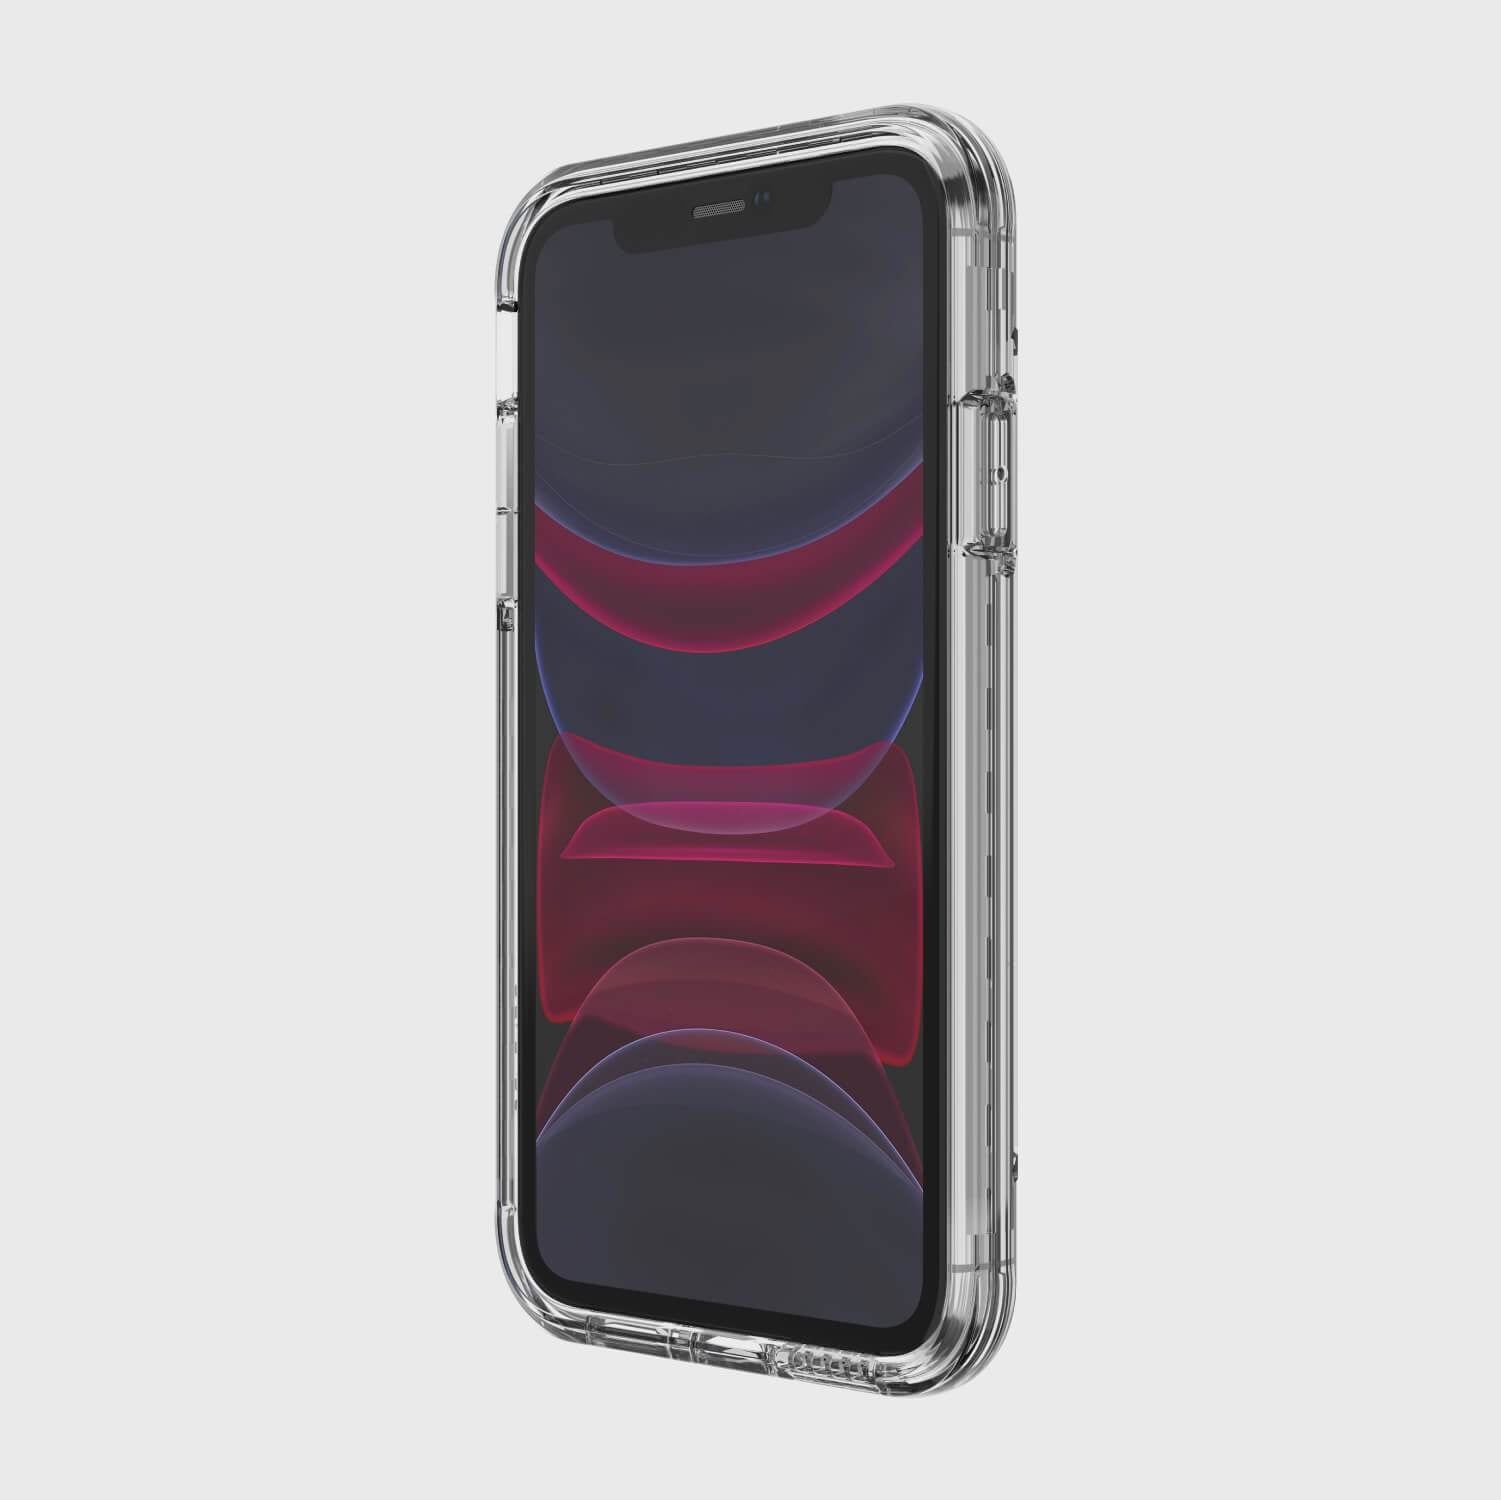 Raptic Air provides drop protection for the back view of an iPhone 11 Pro Case - AIR by Raptic.